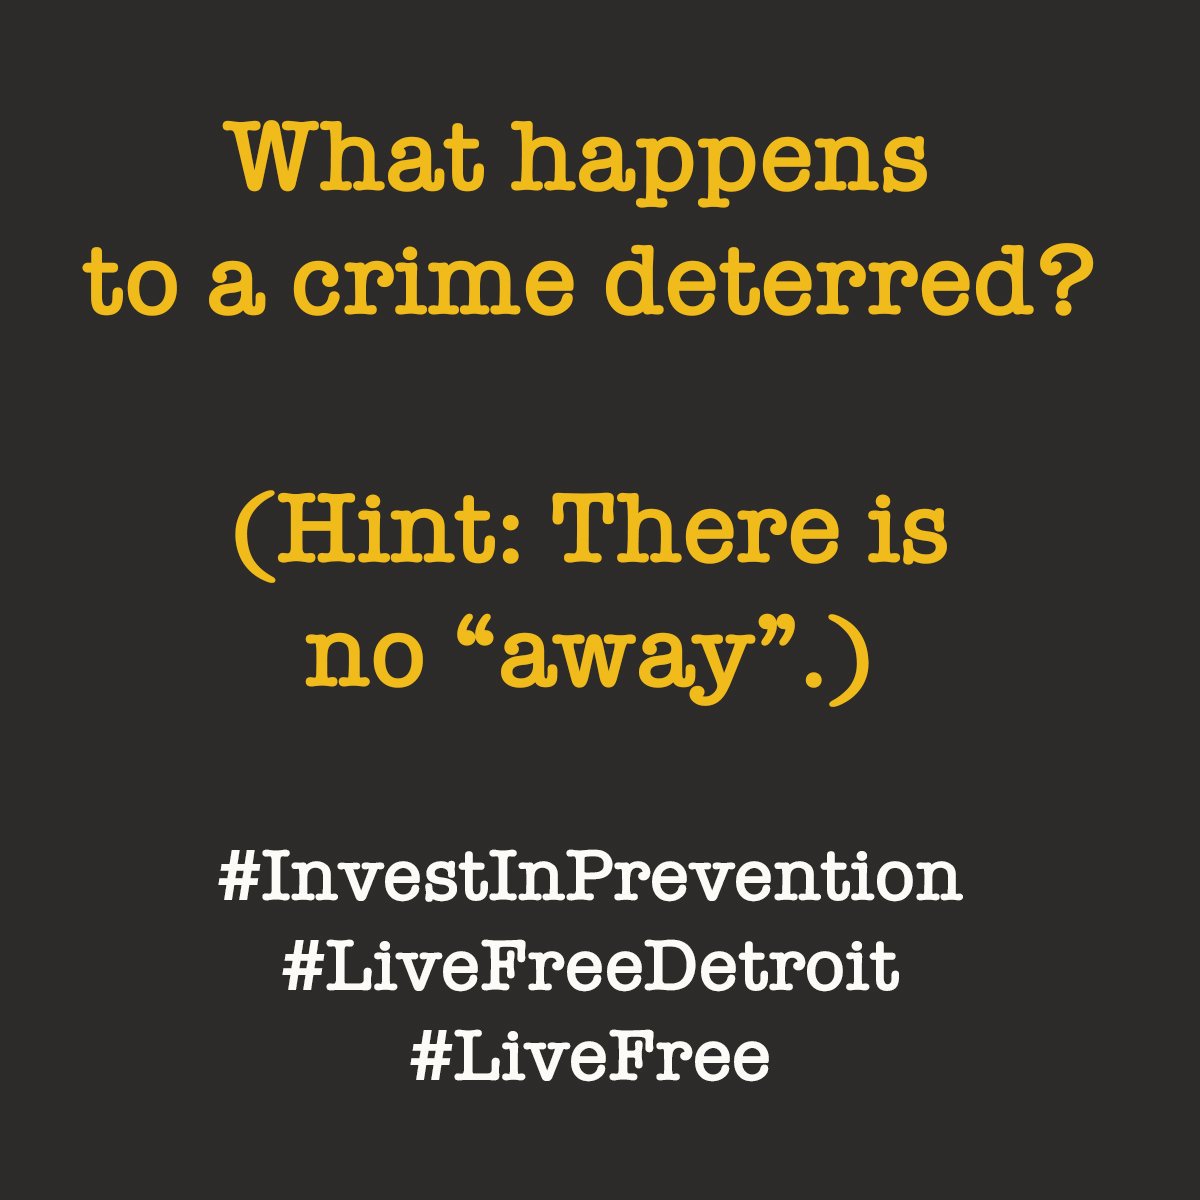 Why are we ok with 'away'?  That's one way to say 'as long as its not my block, my business, my school, my neighborhood...' 

That is a false solution. 

#InvestInPrevention
#InvestInPeace
#LiveFreeDetroit
#LiveFree